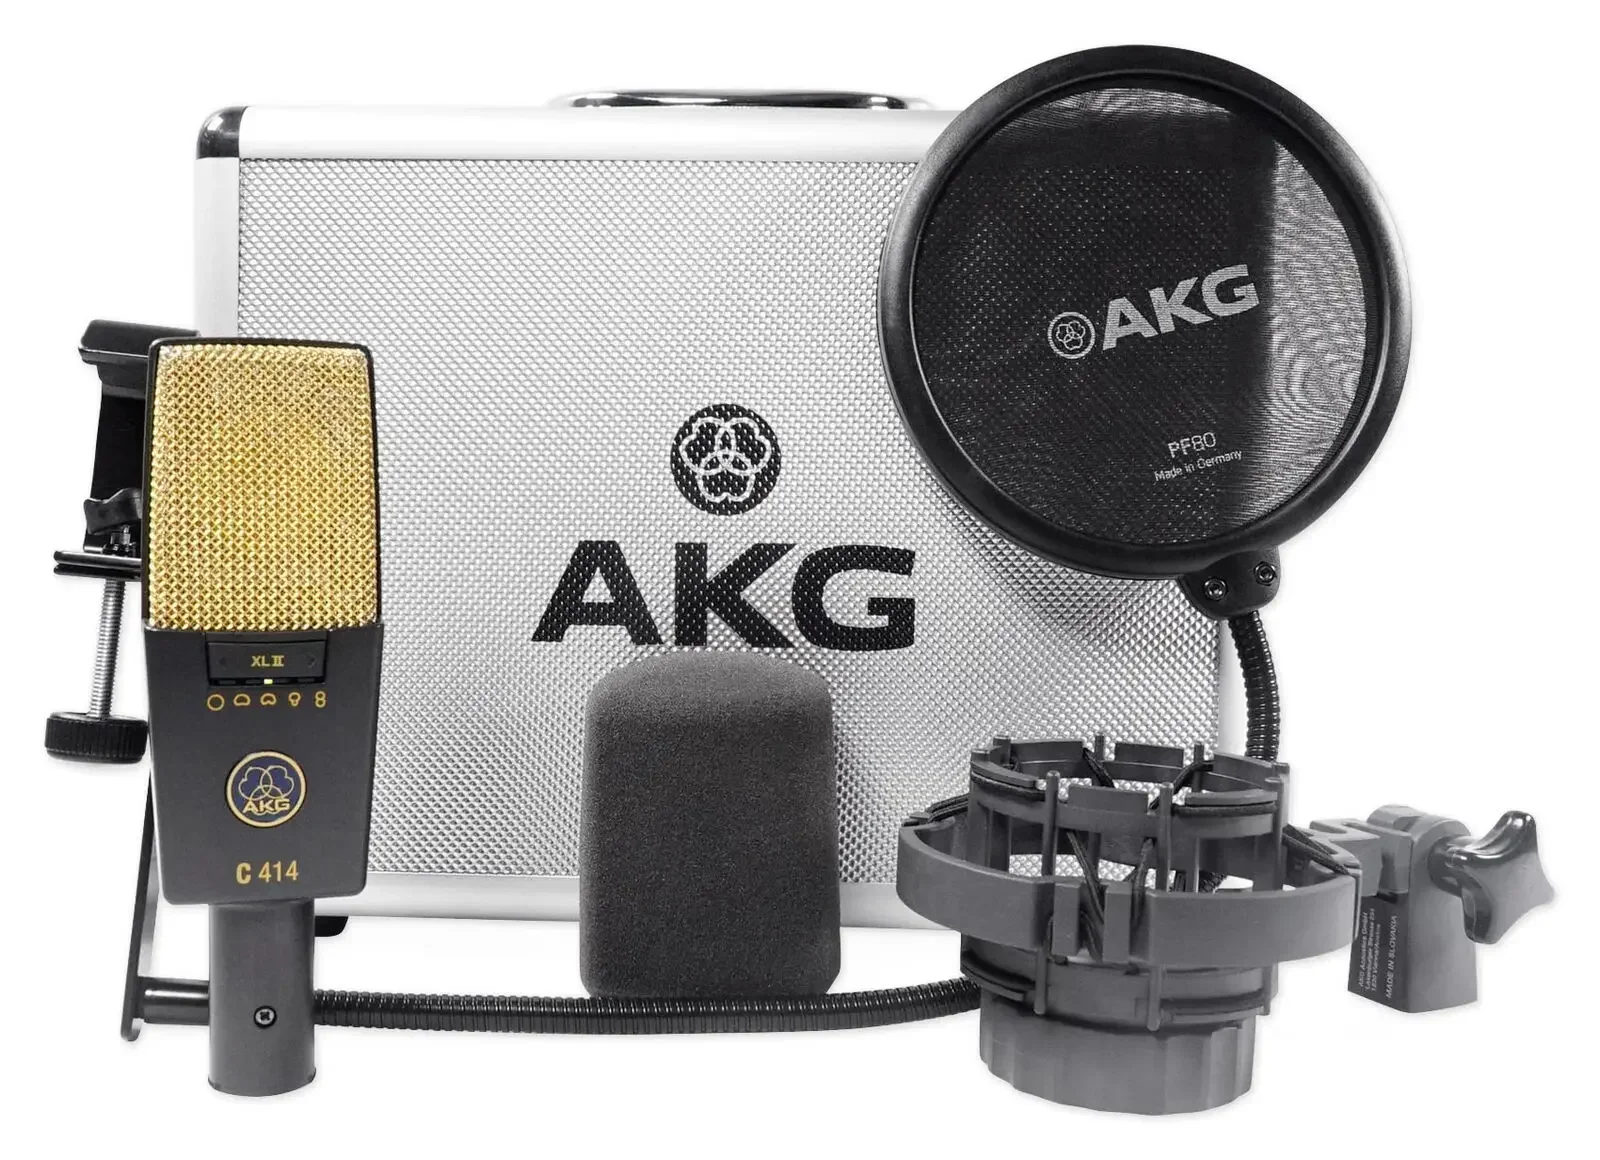 

(NEW DISCOUNT) Stereoset Vocal Condenser Microphone